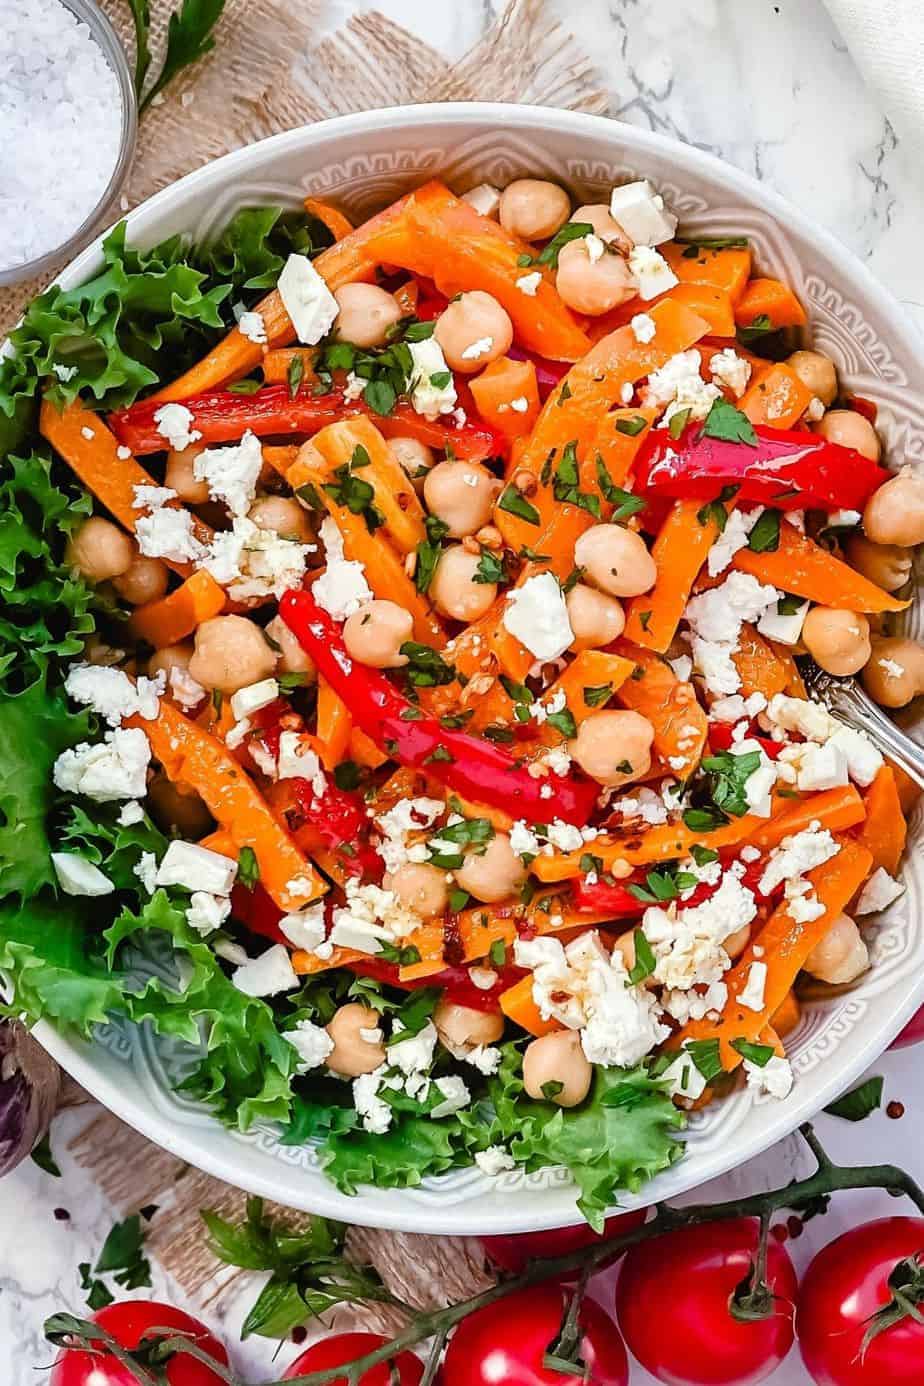 Roasted Pumpkin Chickpea and feta salad - A Delicious bowl of salad loaded with Pumpkins, bell peppers, carrots, Chickpeas and salty Feta. All this goodness is dressed in Maple Chili Dressing to add that little extra touch. -The Yummy Bowl